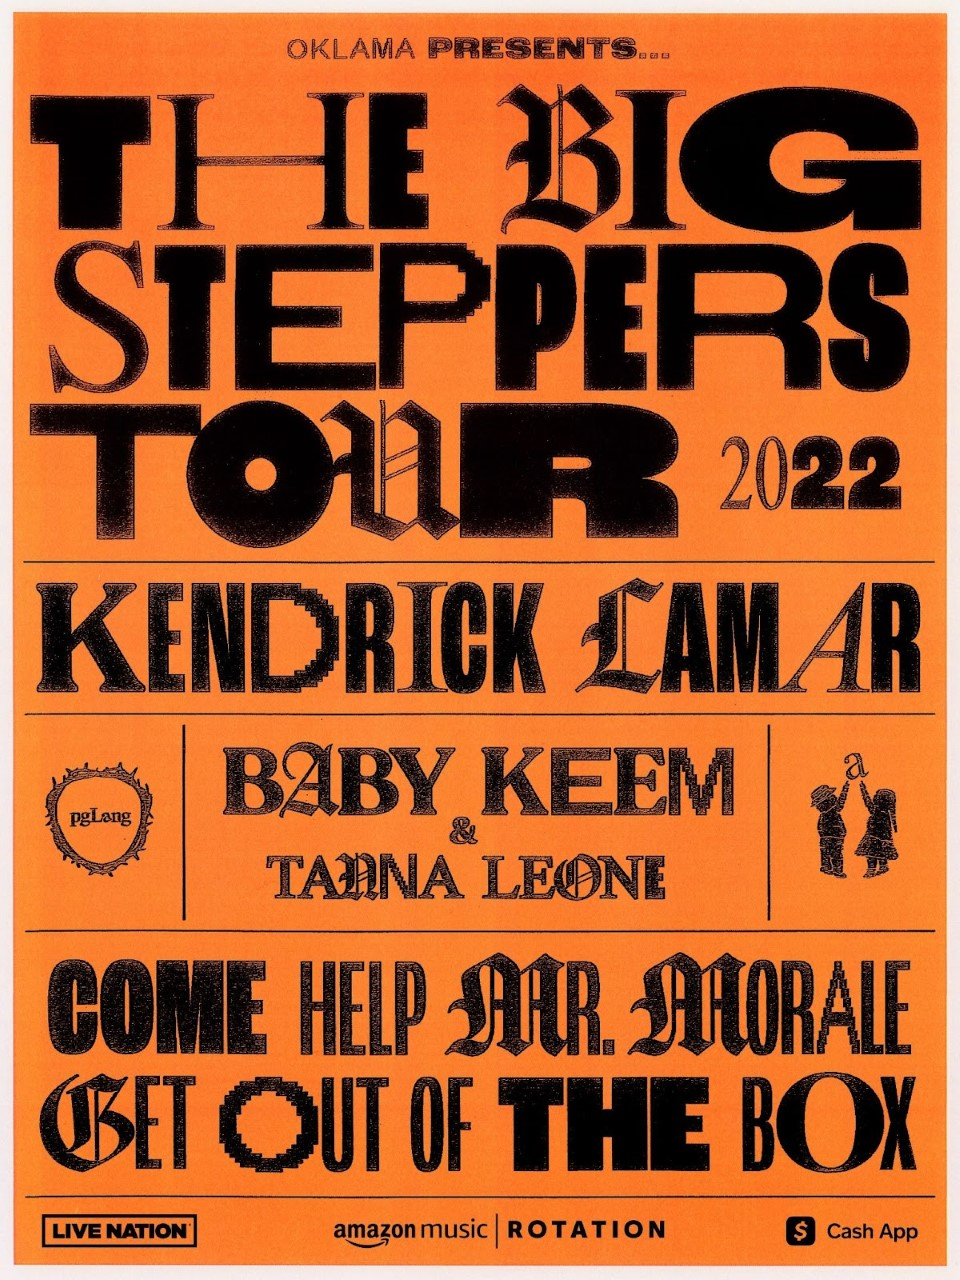 Catch Camryn on the Big Steppers Tour w/Kendrick Lamar Streaming